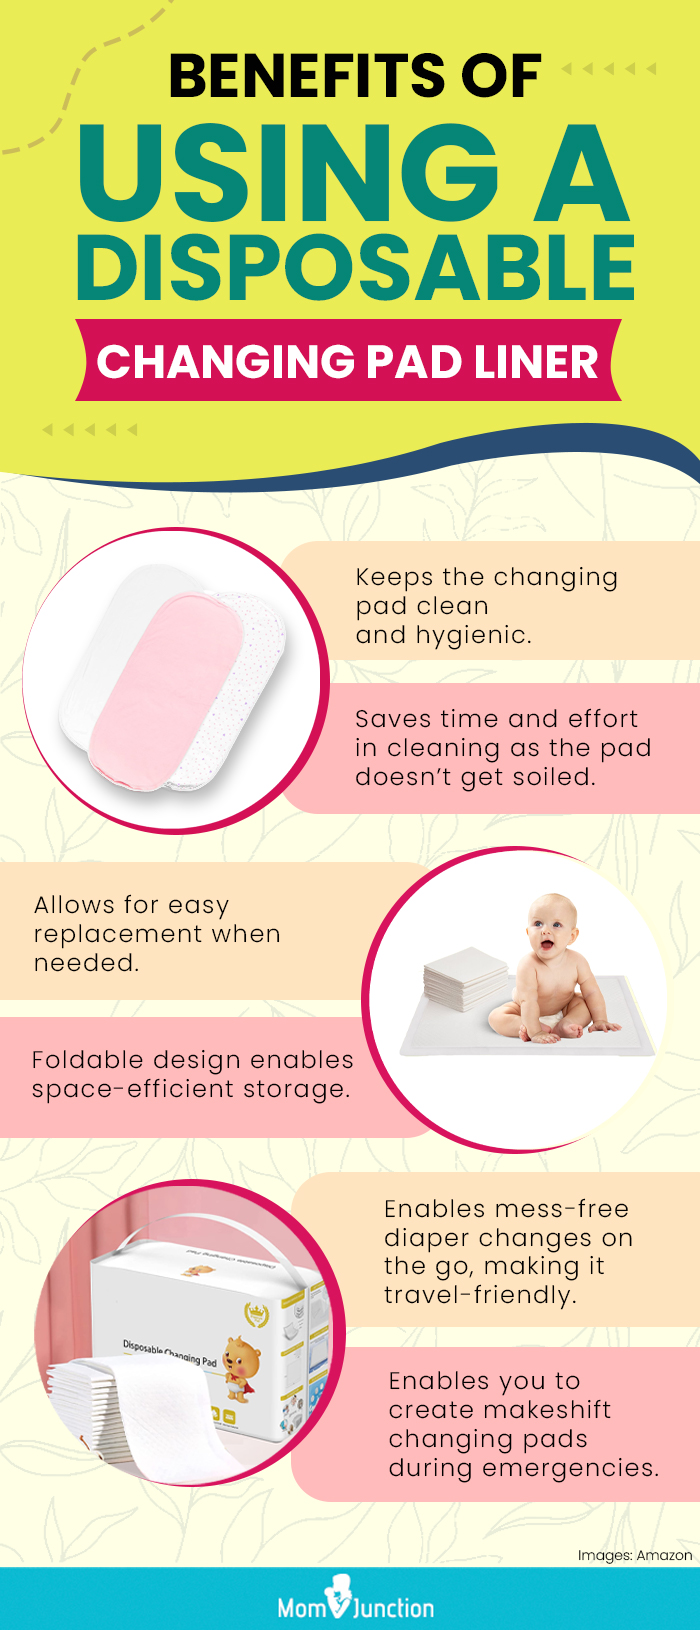 Benefits Of Using A Disposable Changing Pad Liner (infographic)